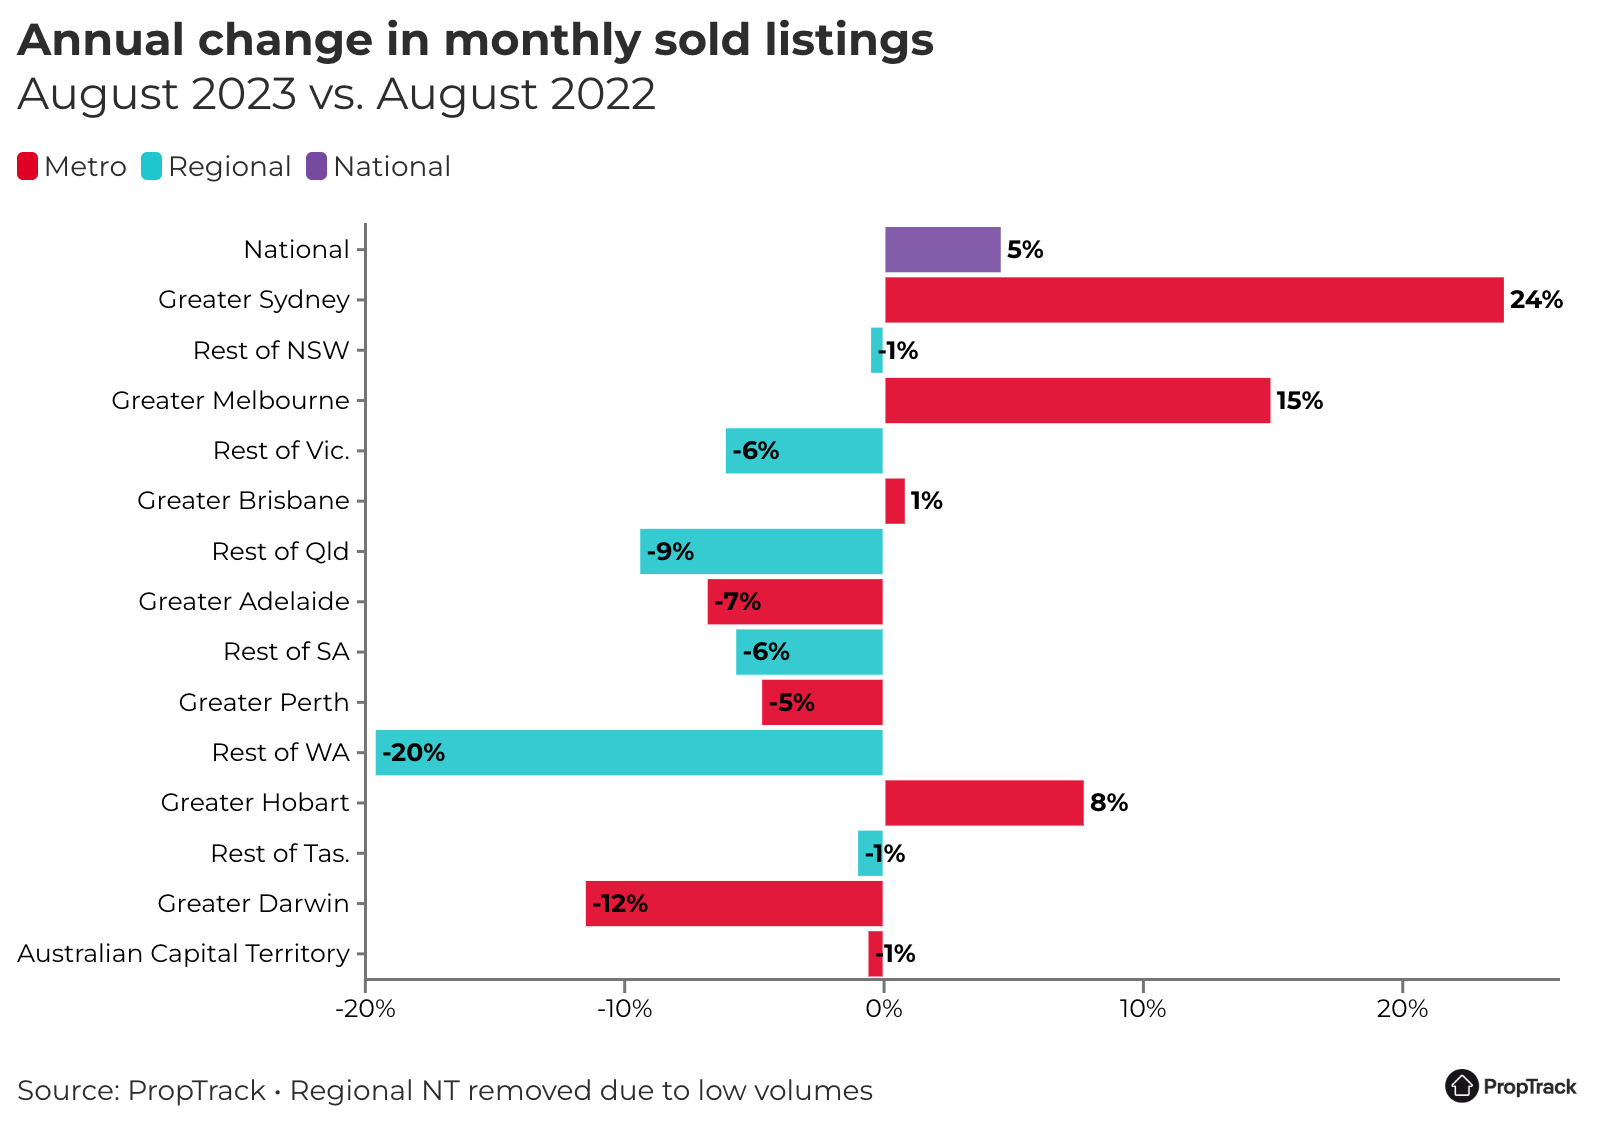 Chart showing annual change in monthly sold listings - August 2023 vs August 2022